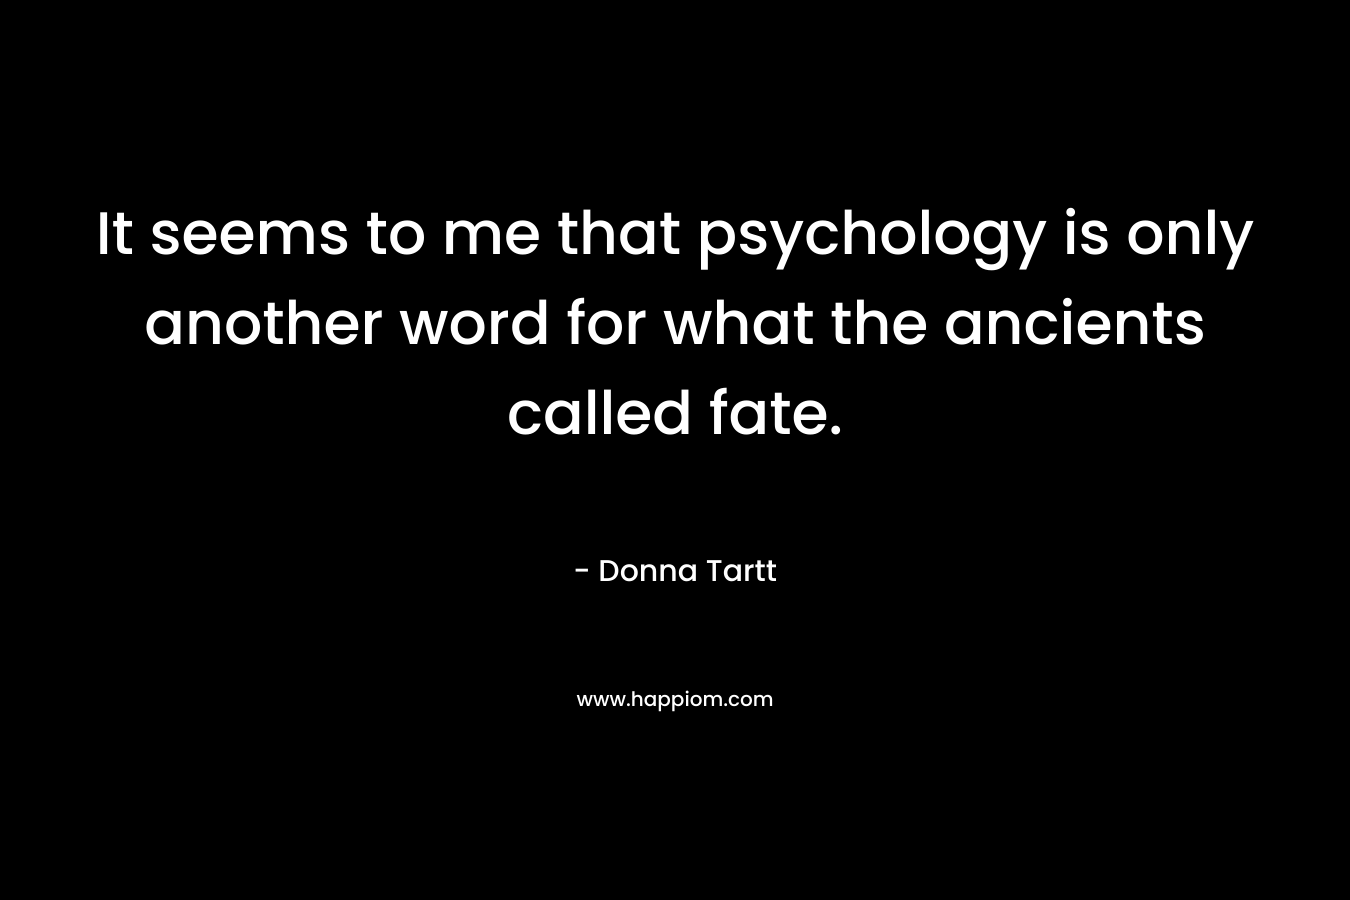 It seems to me that psychology is only another word for what the ancients called fate.